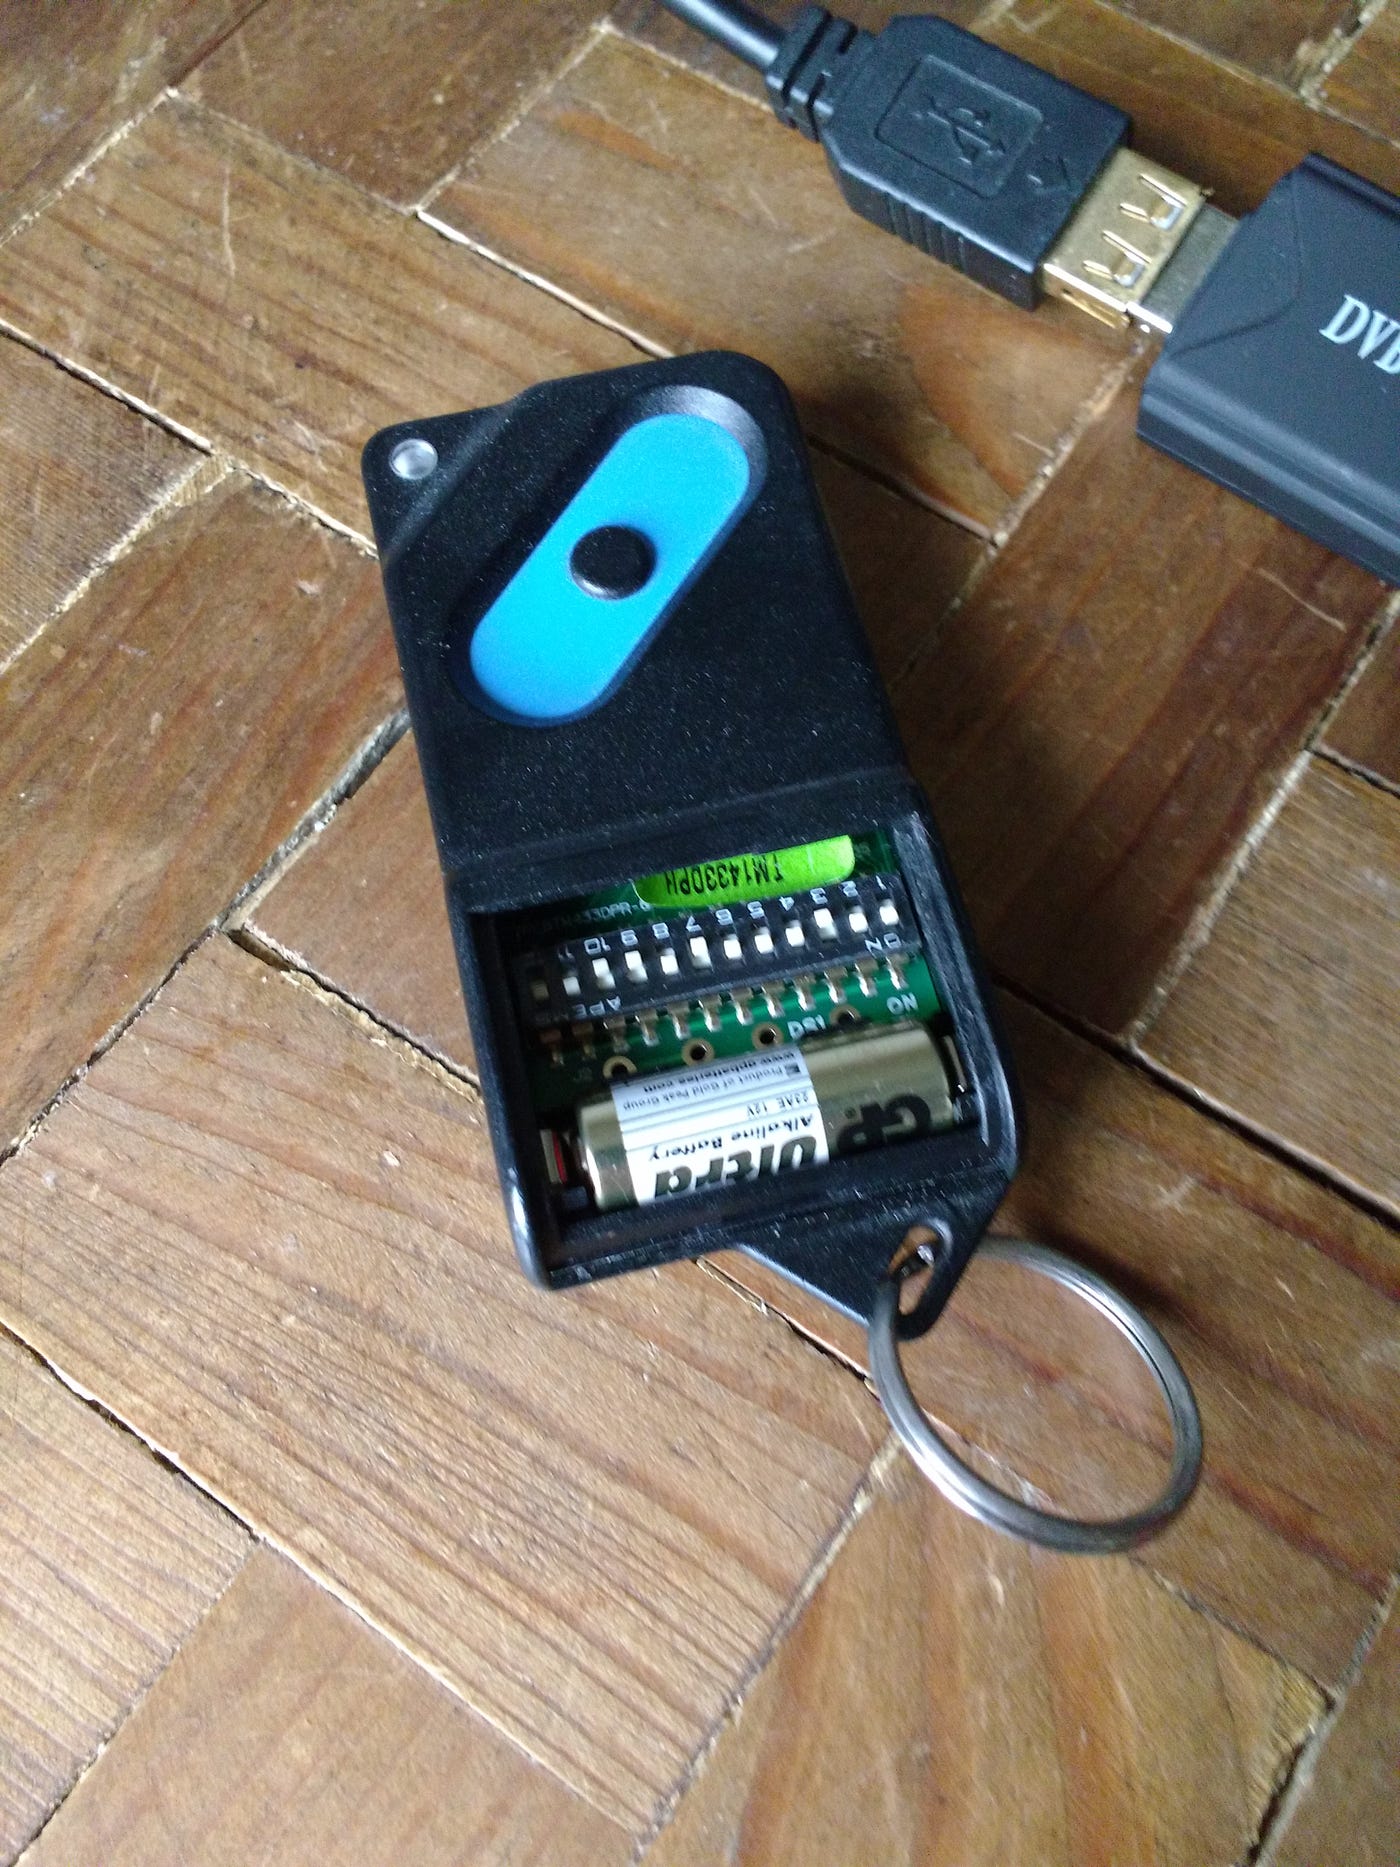 Decoding a garage door opener with an RTL-SDR | by Eoin | Medium